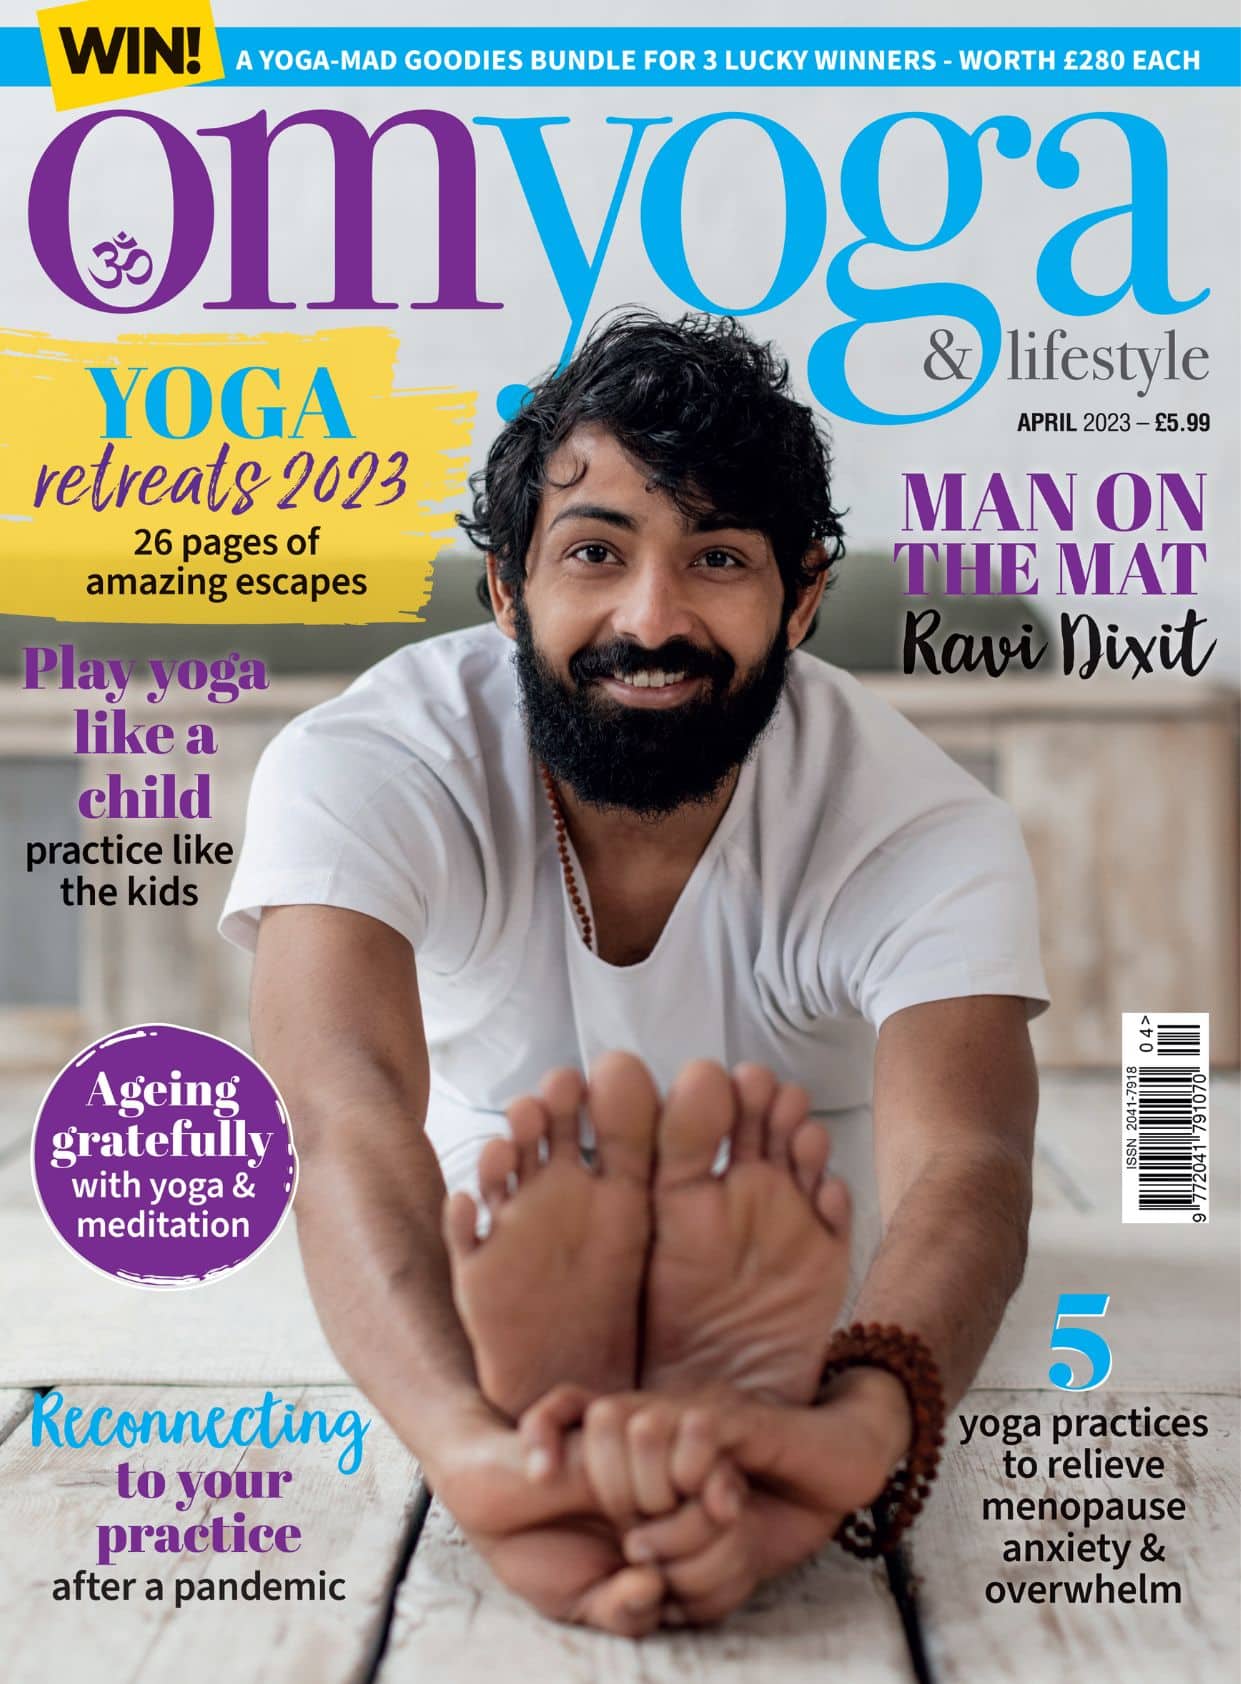 Read OM Yoga magazine on Readly - the ultimate magazine